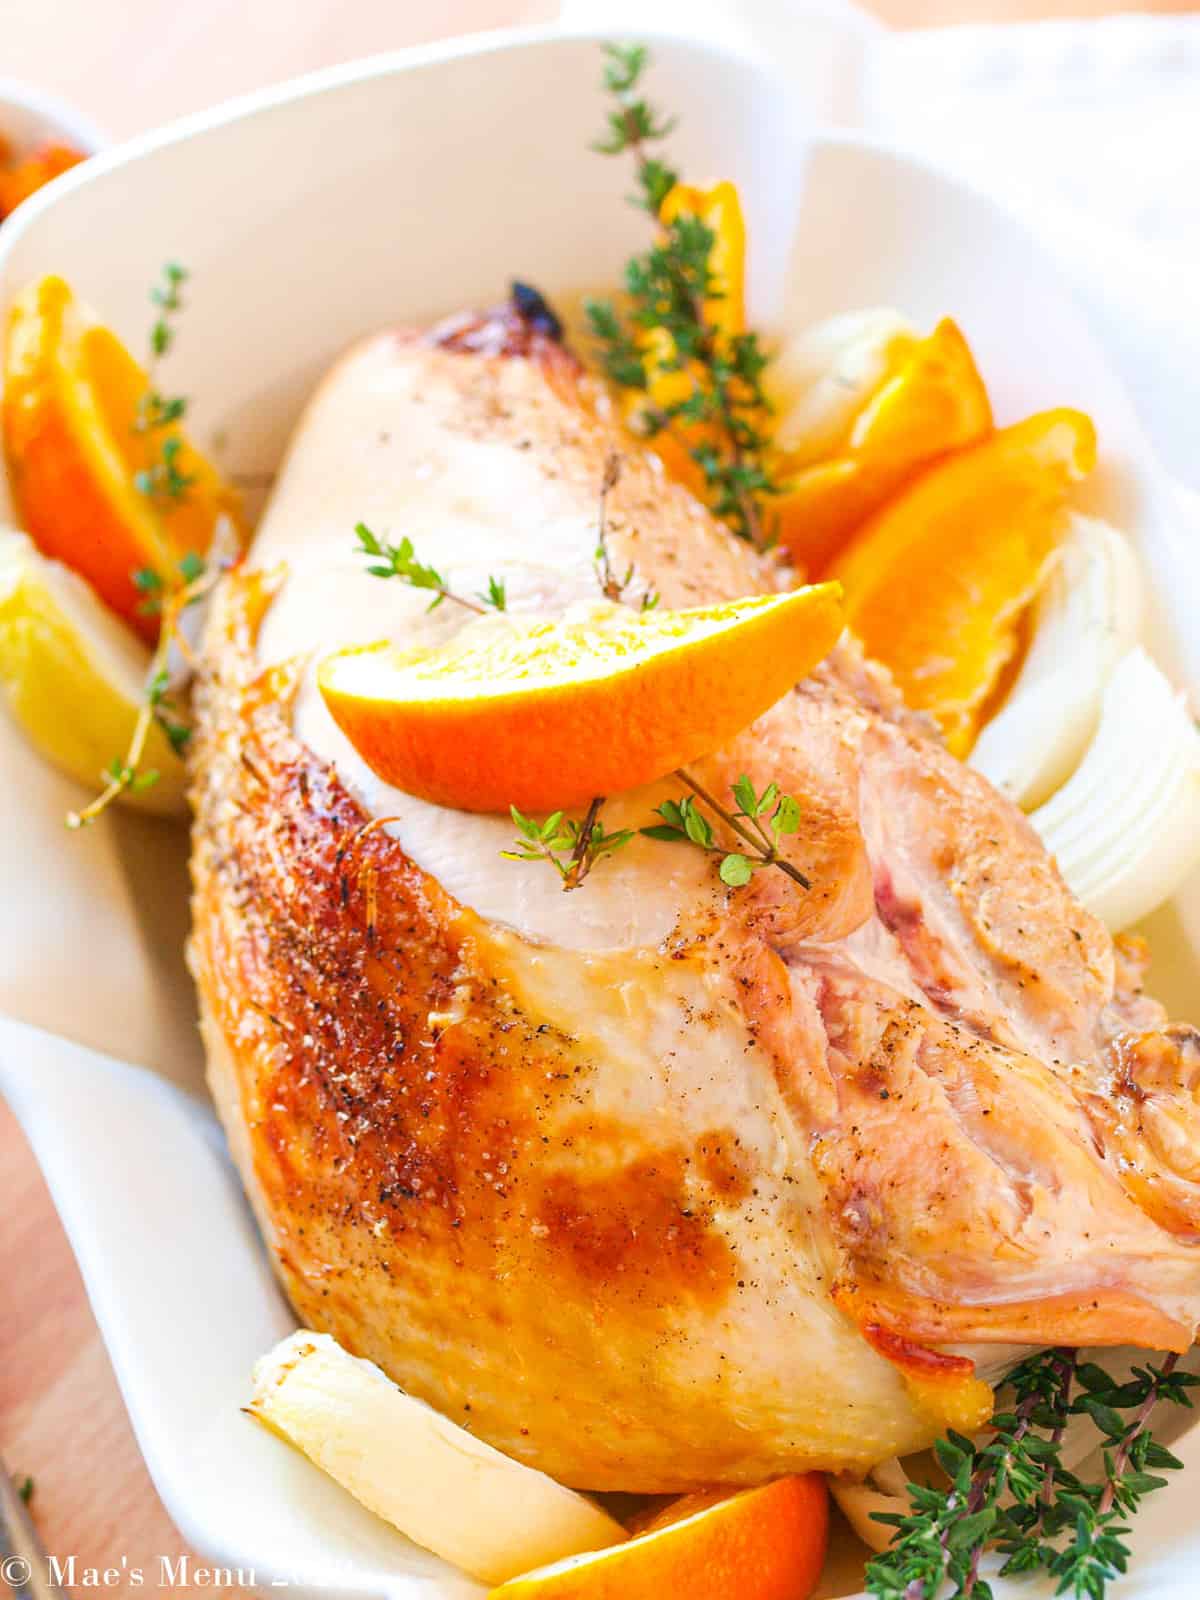 An up-close shot of a roasted turkey breast in a serving bowl